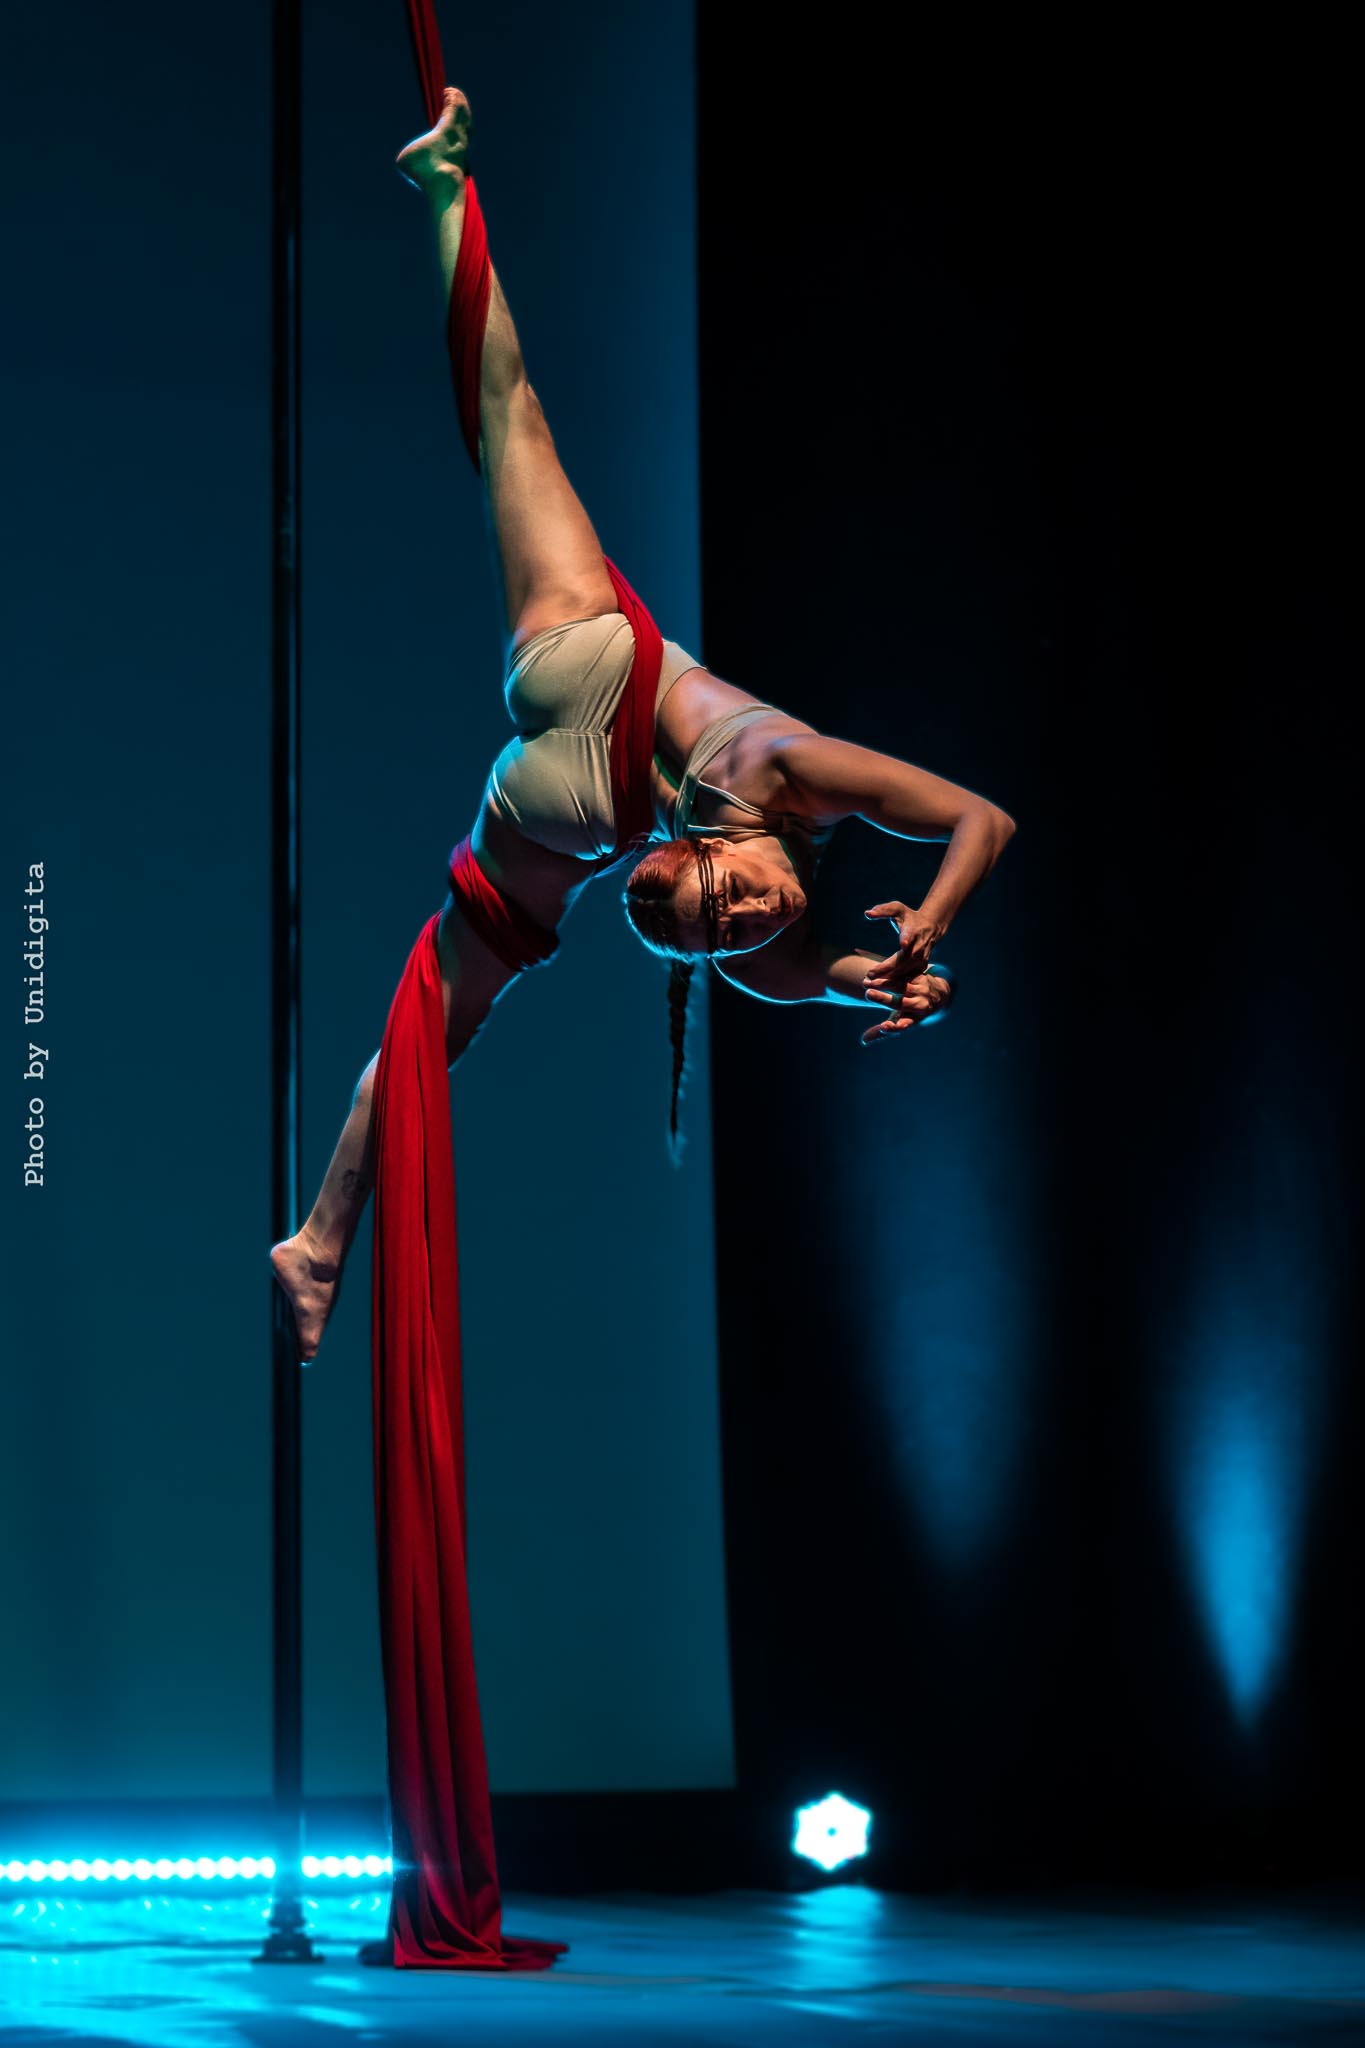 New: soul on aerial arts!